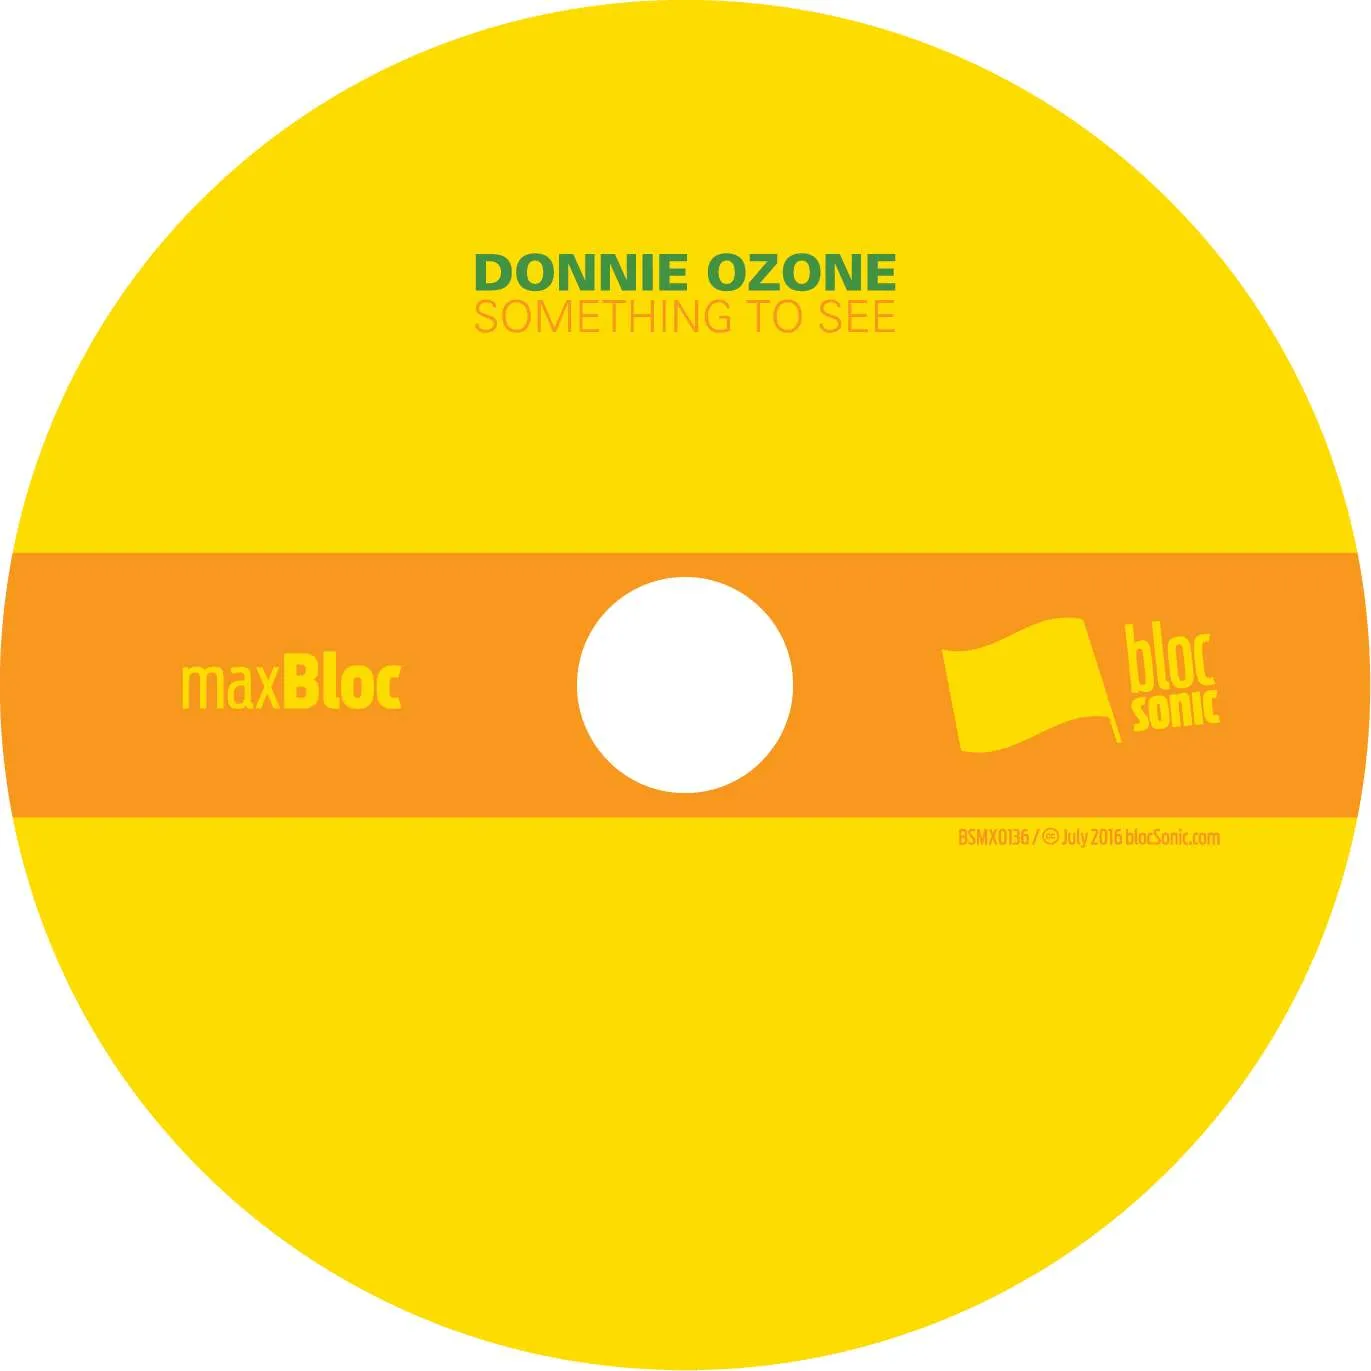 Album disc for “Something To See” by Donnie Ozone